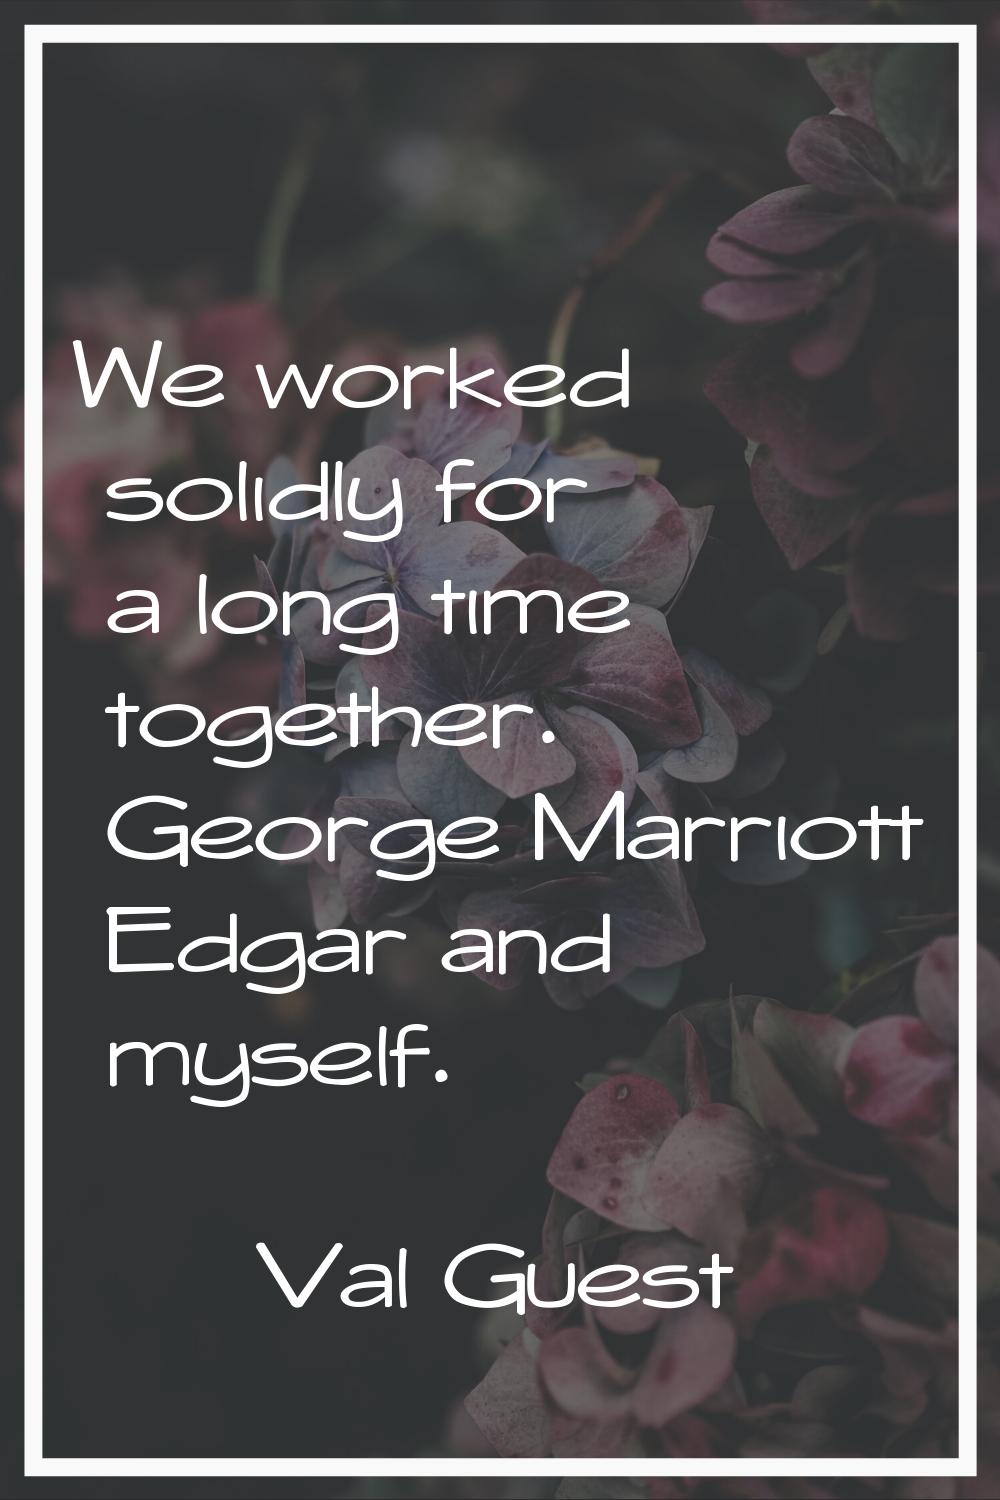 We worked solidly for a long time together. George Marriott Edgar and myself.